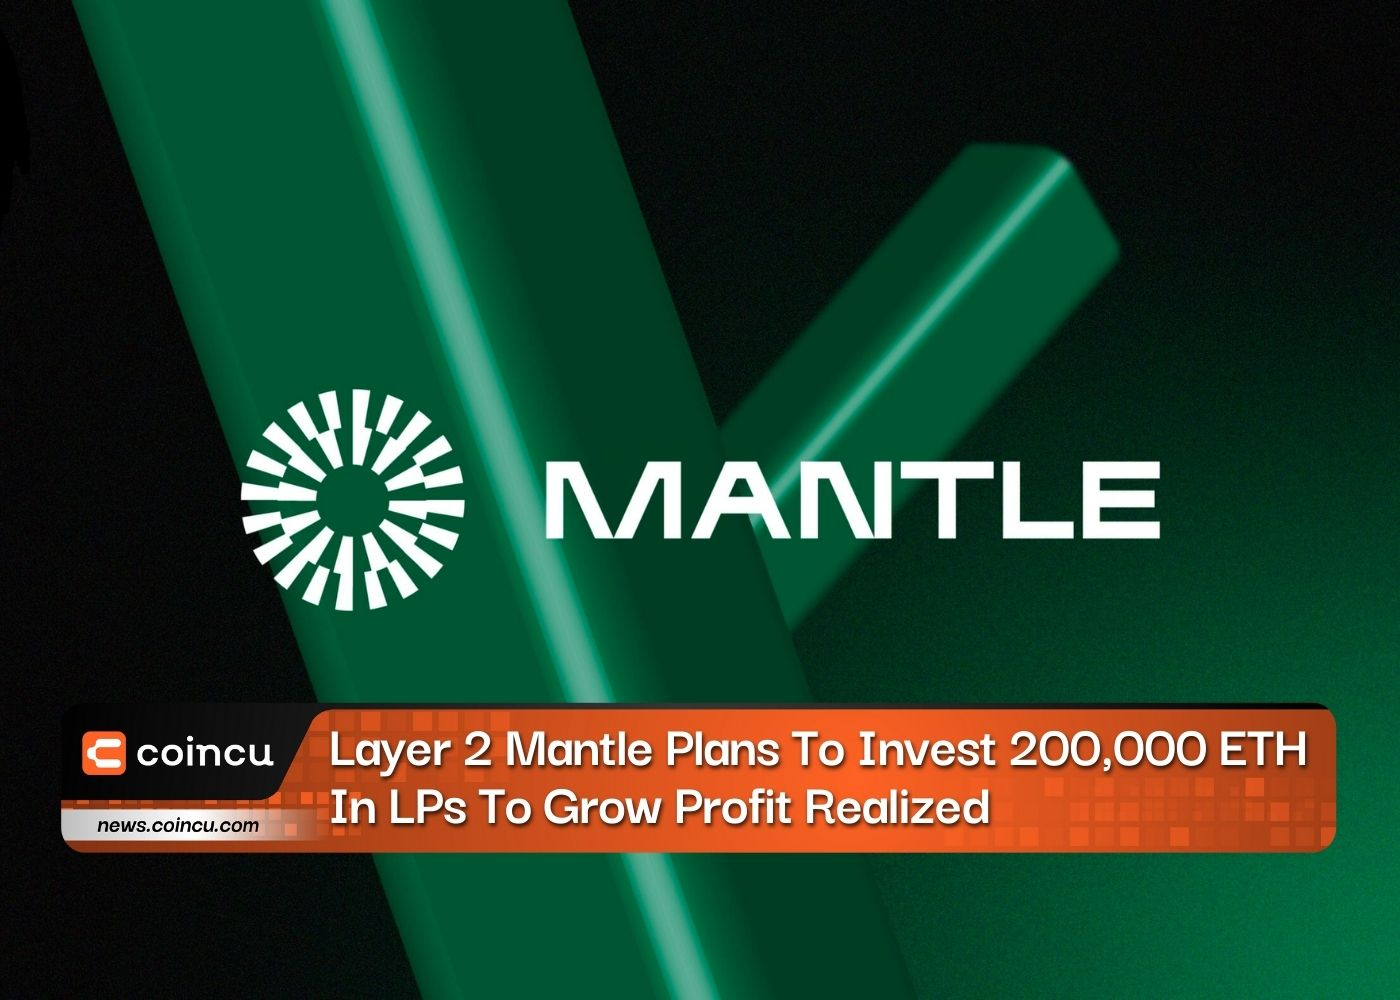 Layer 2 Mantle Plans To Invest 200,000 ETH In LPs To Grow Profit Realized